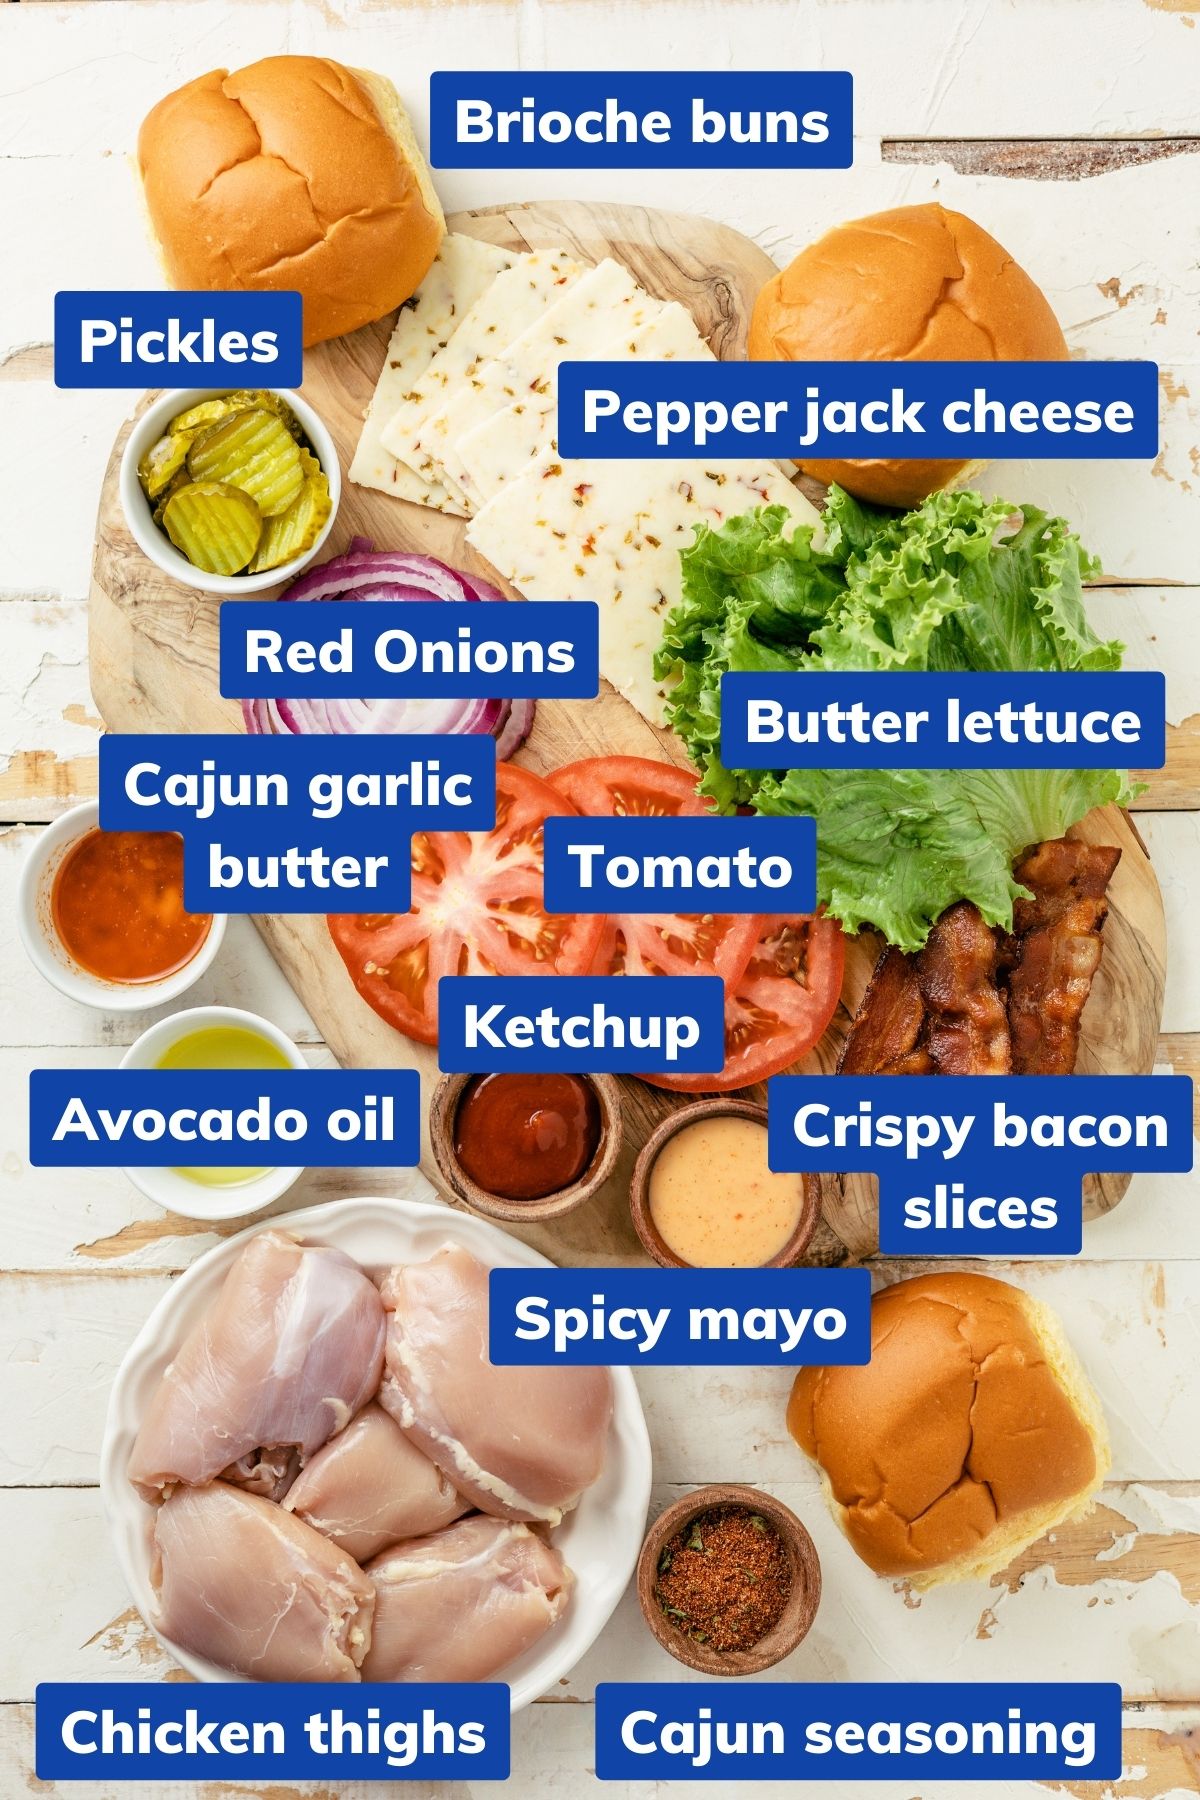 Chicken thighs, Cajun seasoning, Avocado oil, Cajun Garlic Butter, Brioche Buns, Pepper Jack Cheese, Butter Lettuce, Tomato, Pickles, Red Onions, Ketchup, Crispy Bacon Slices, Spicy Mayo placed on separate bowls and a wooden board